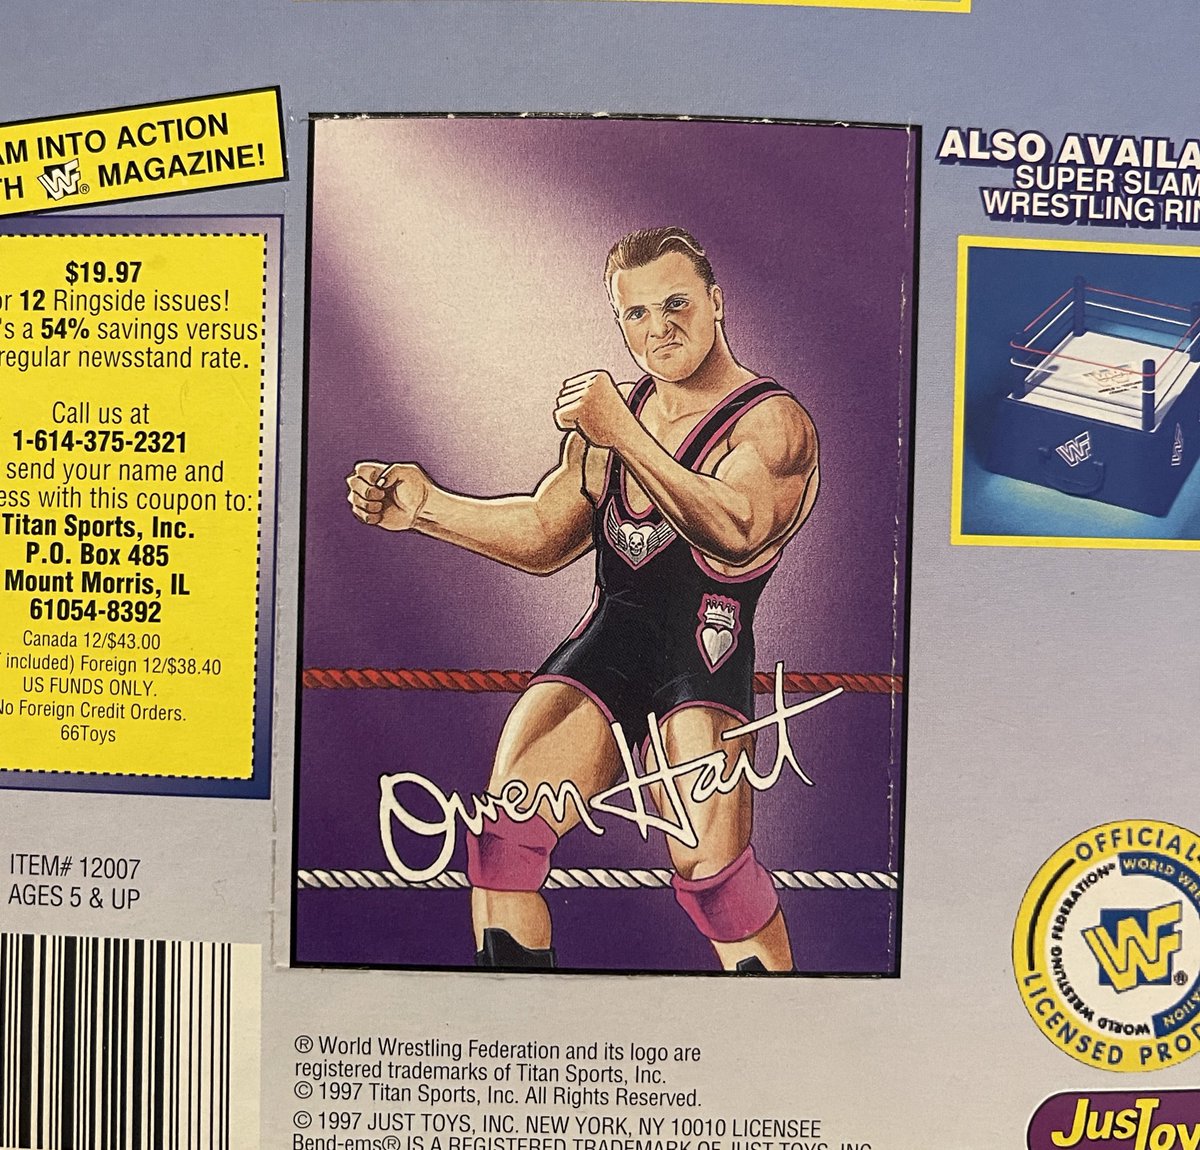 I guess I gotta rip this out eh? #wrestlingcards #owenhart #figlife